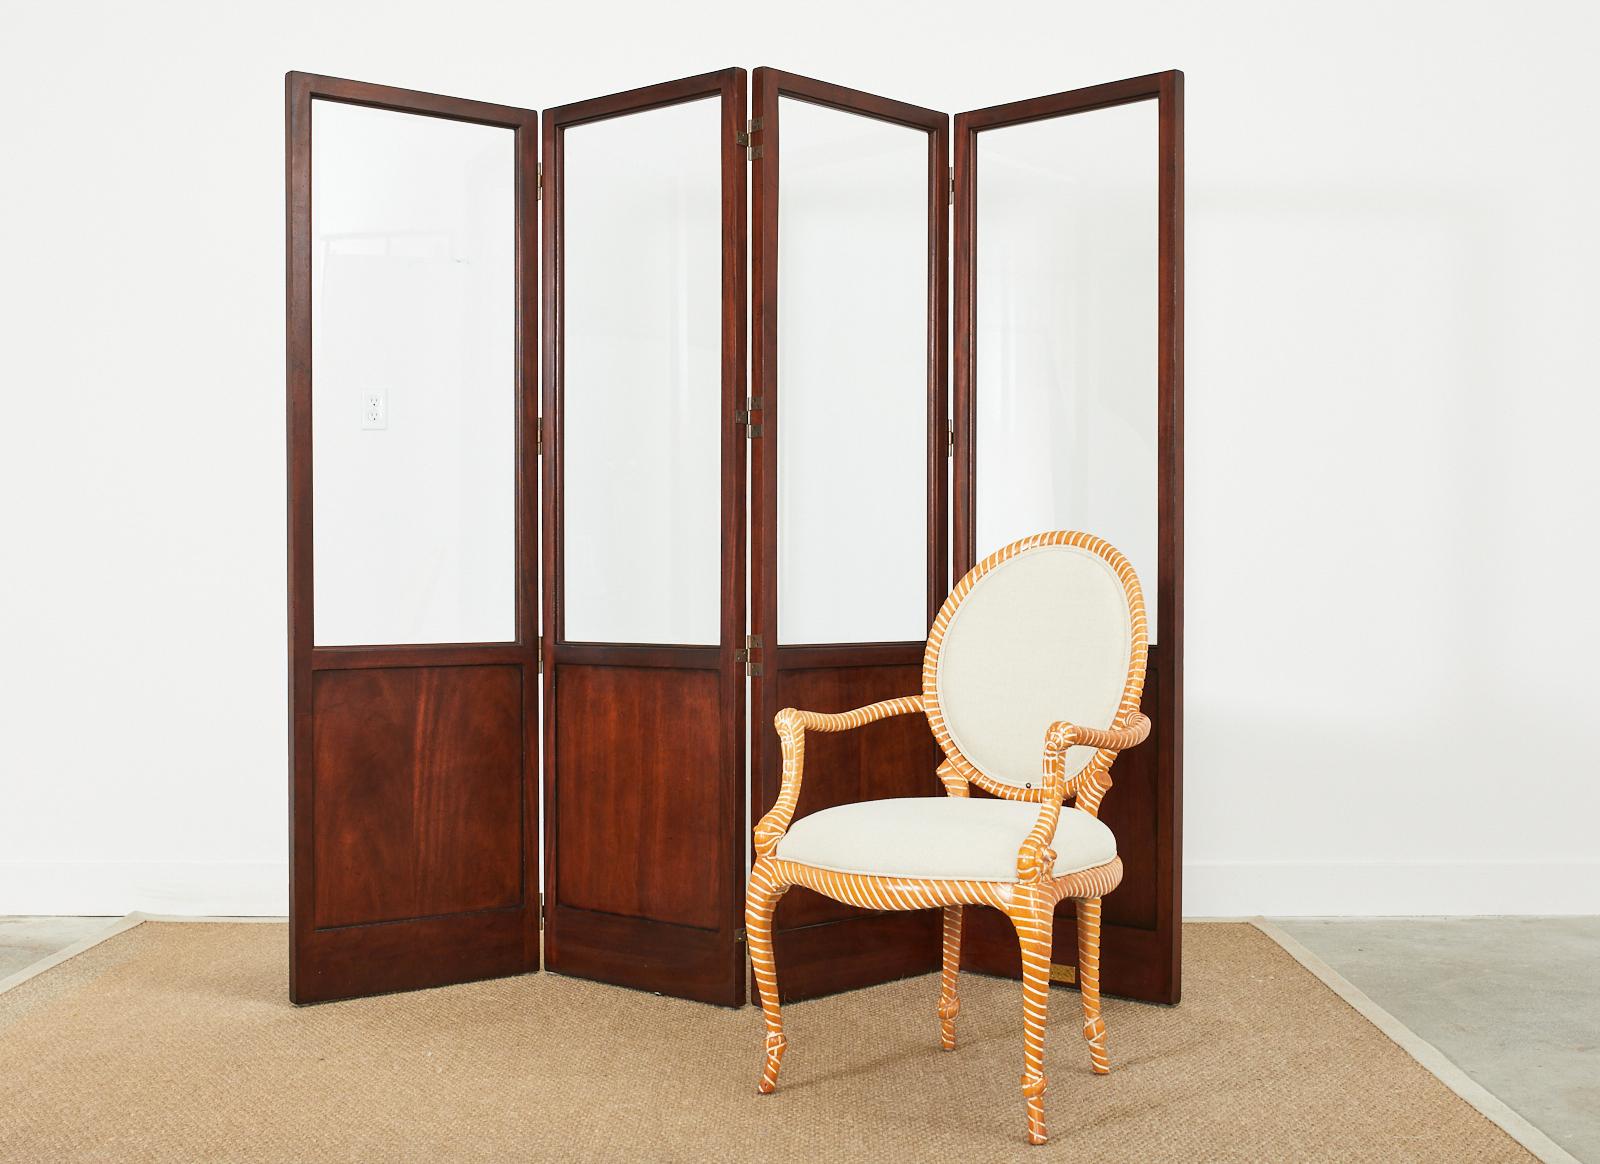 Distinctive four panel mahogany folding screen designed by Oscar de la Renta for Century Furniture. The screen features thick panes of beveled glass inset into heavy mahogany panels with a rich dark finish. The mahogany has a very subtle